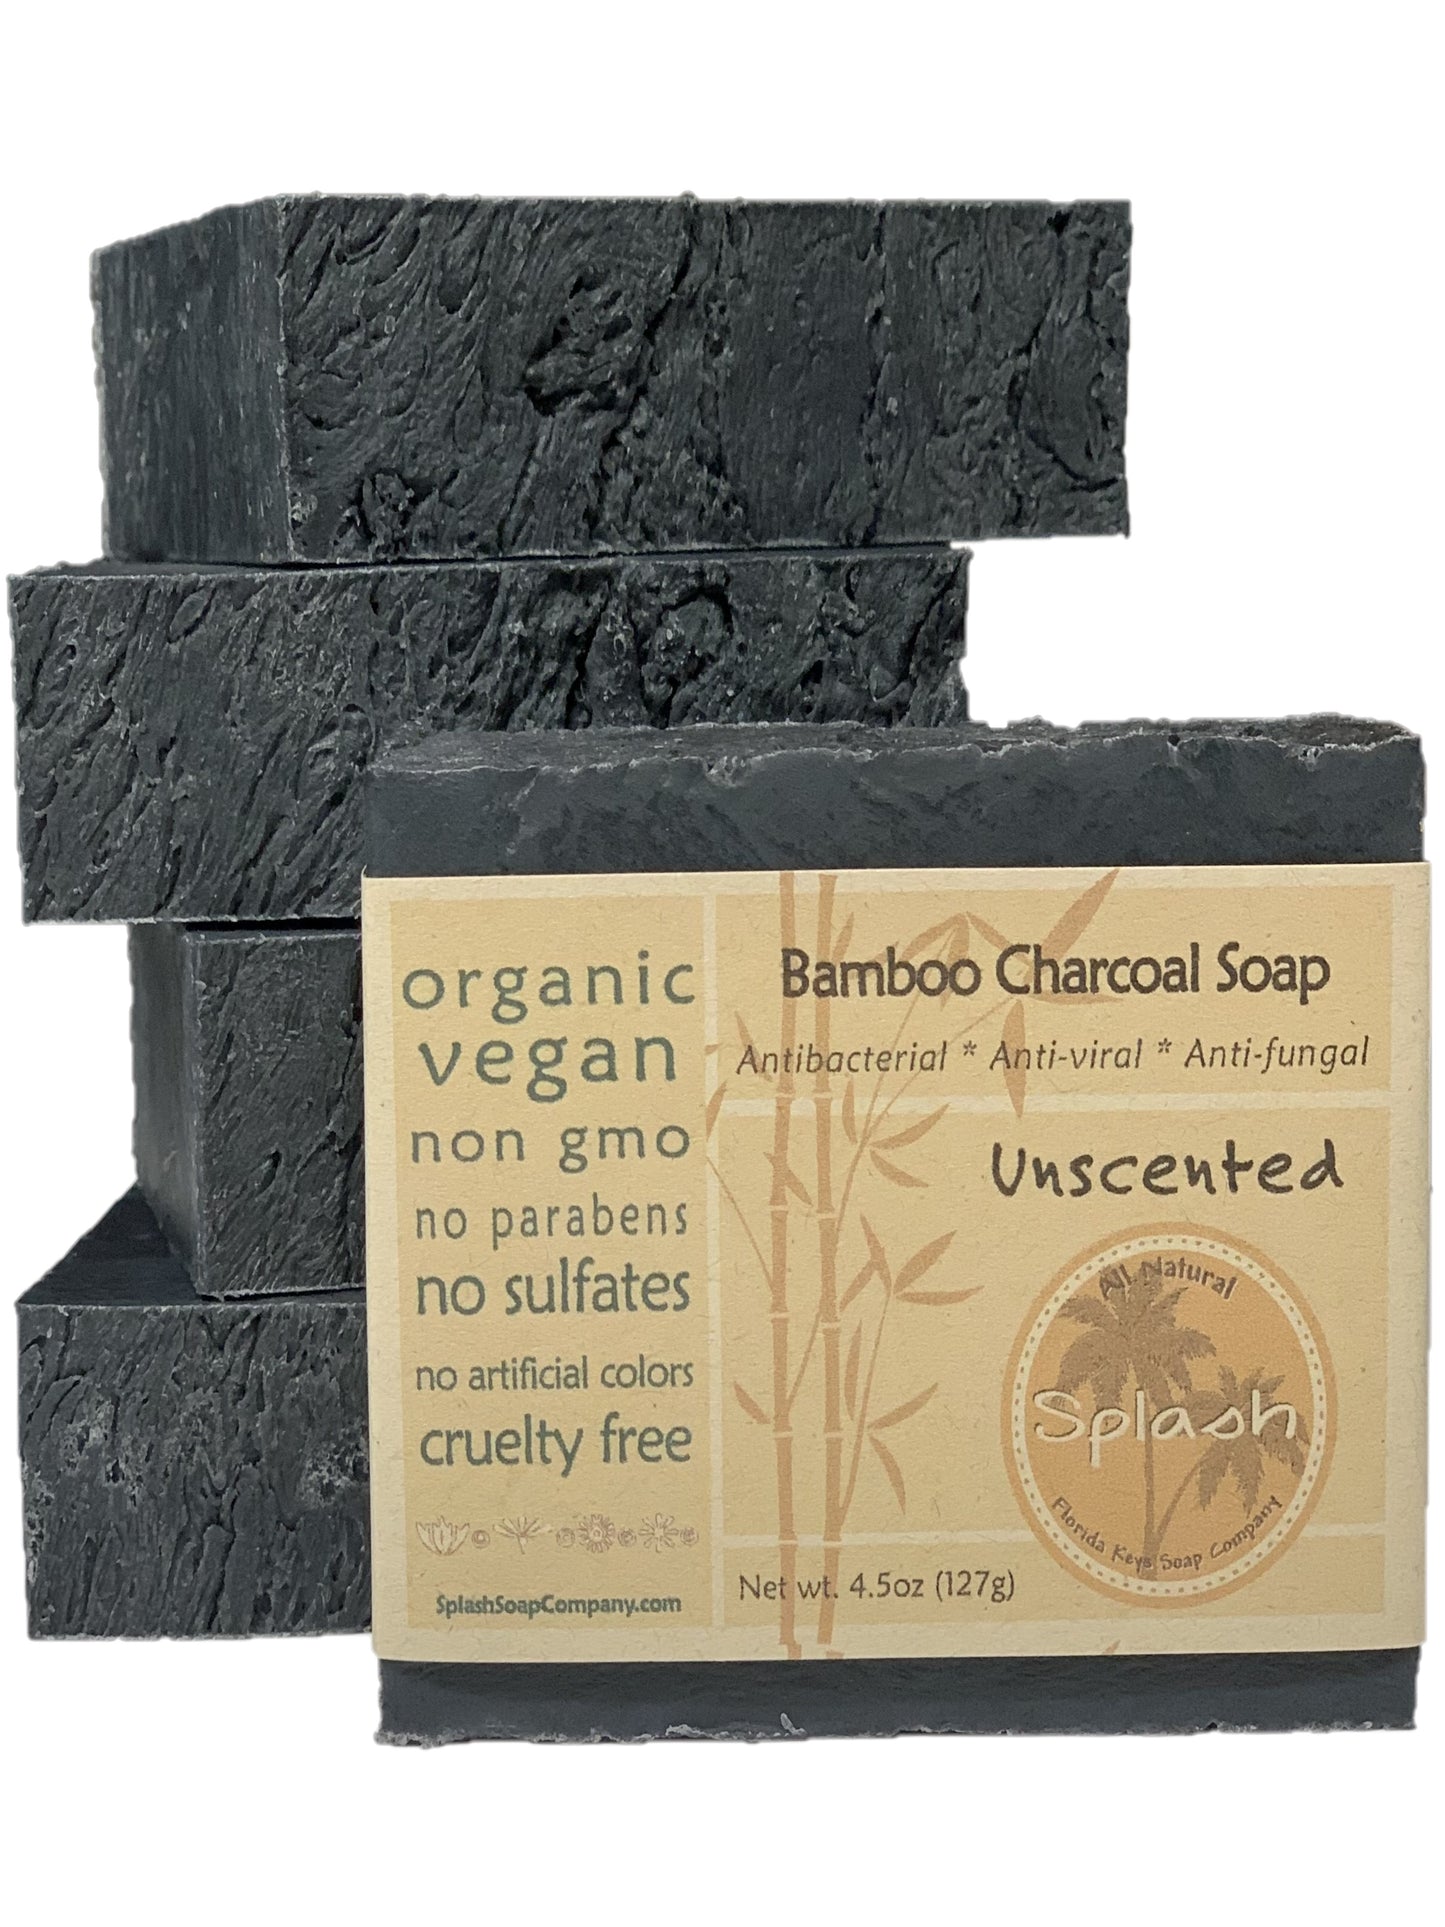 Unscented Bamboo Charcoal Soap - Splash Soap Company